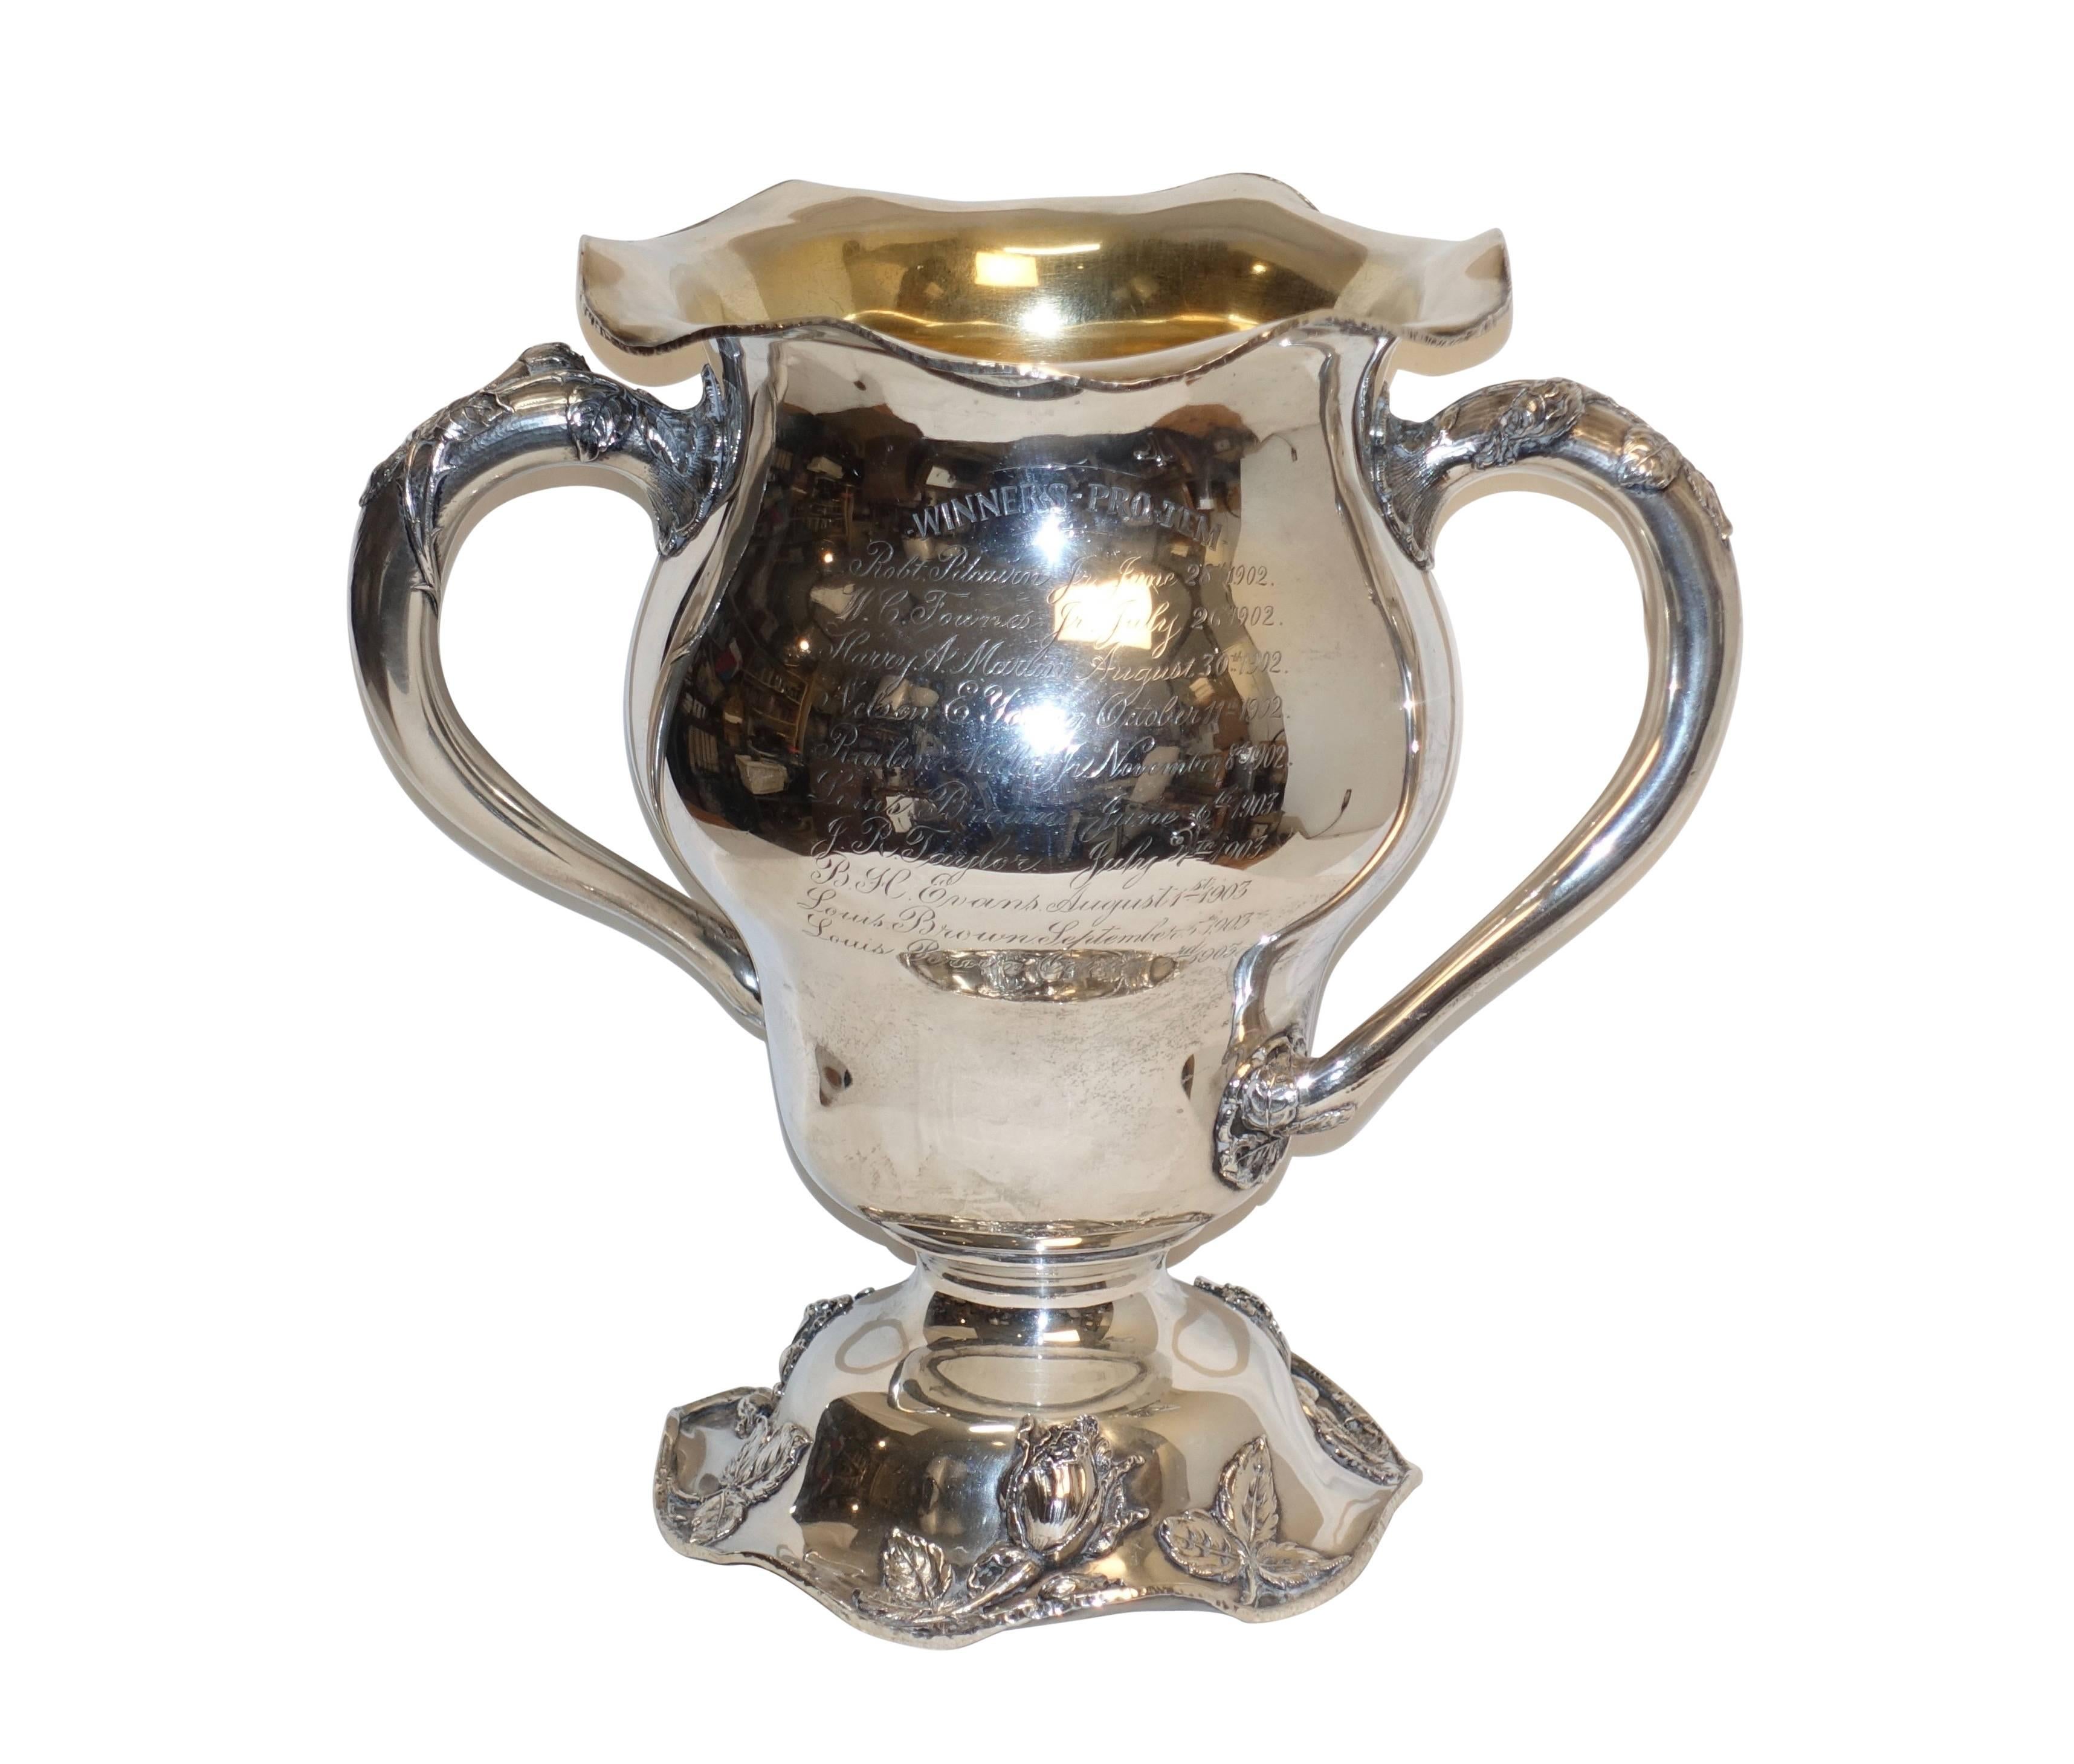 A large sterling silver trophy for Pittsburgh, Hotel Country Club. Schenley golf cup won by Boris Brown, the reverse side engraved with winners pro tem 1902 and 1903. Having a gold wash interior and marked on the underside with an ‘M’ above a leaf